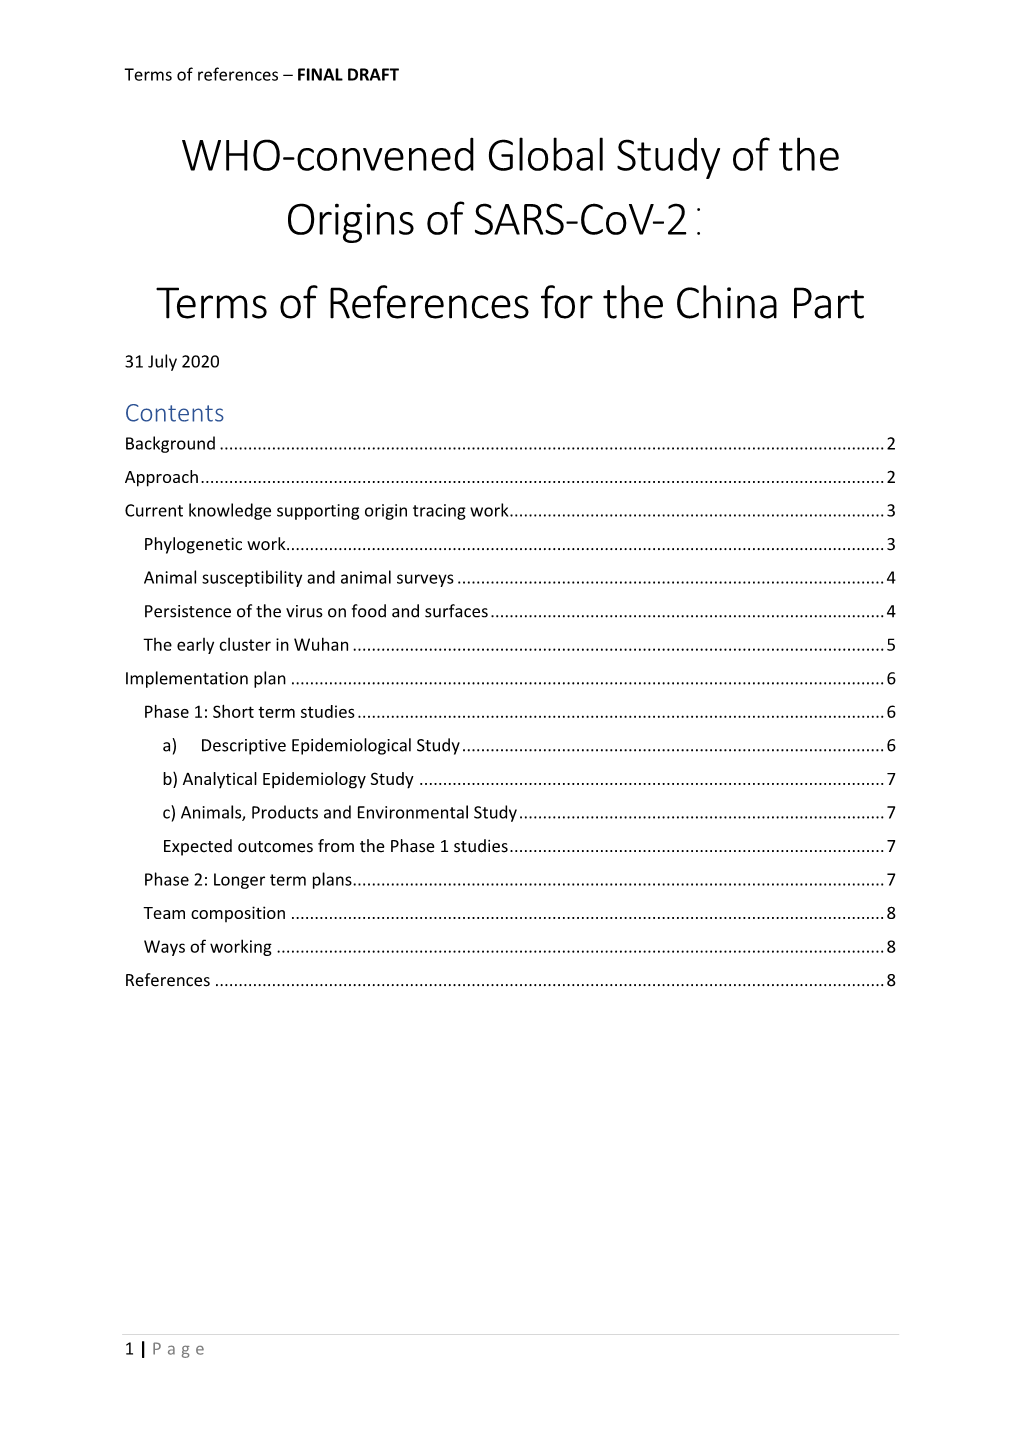 WHO-Convened Global Study of the Origins of SARS-Cov-2： Terms of References for the China Part